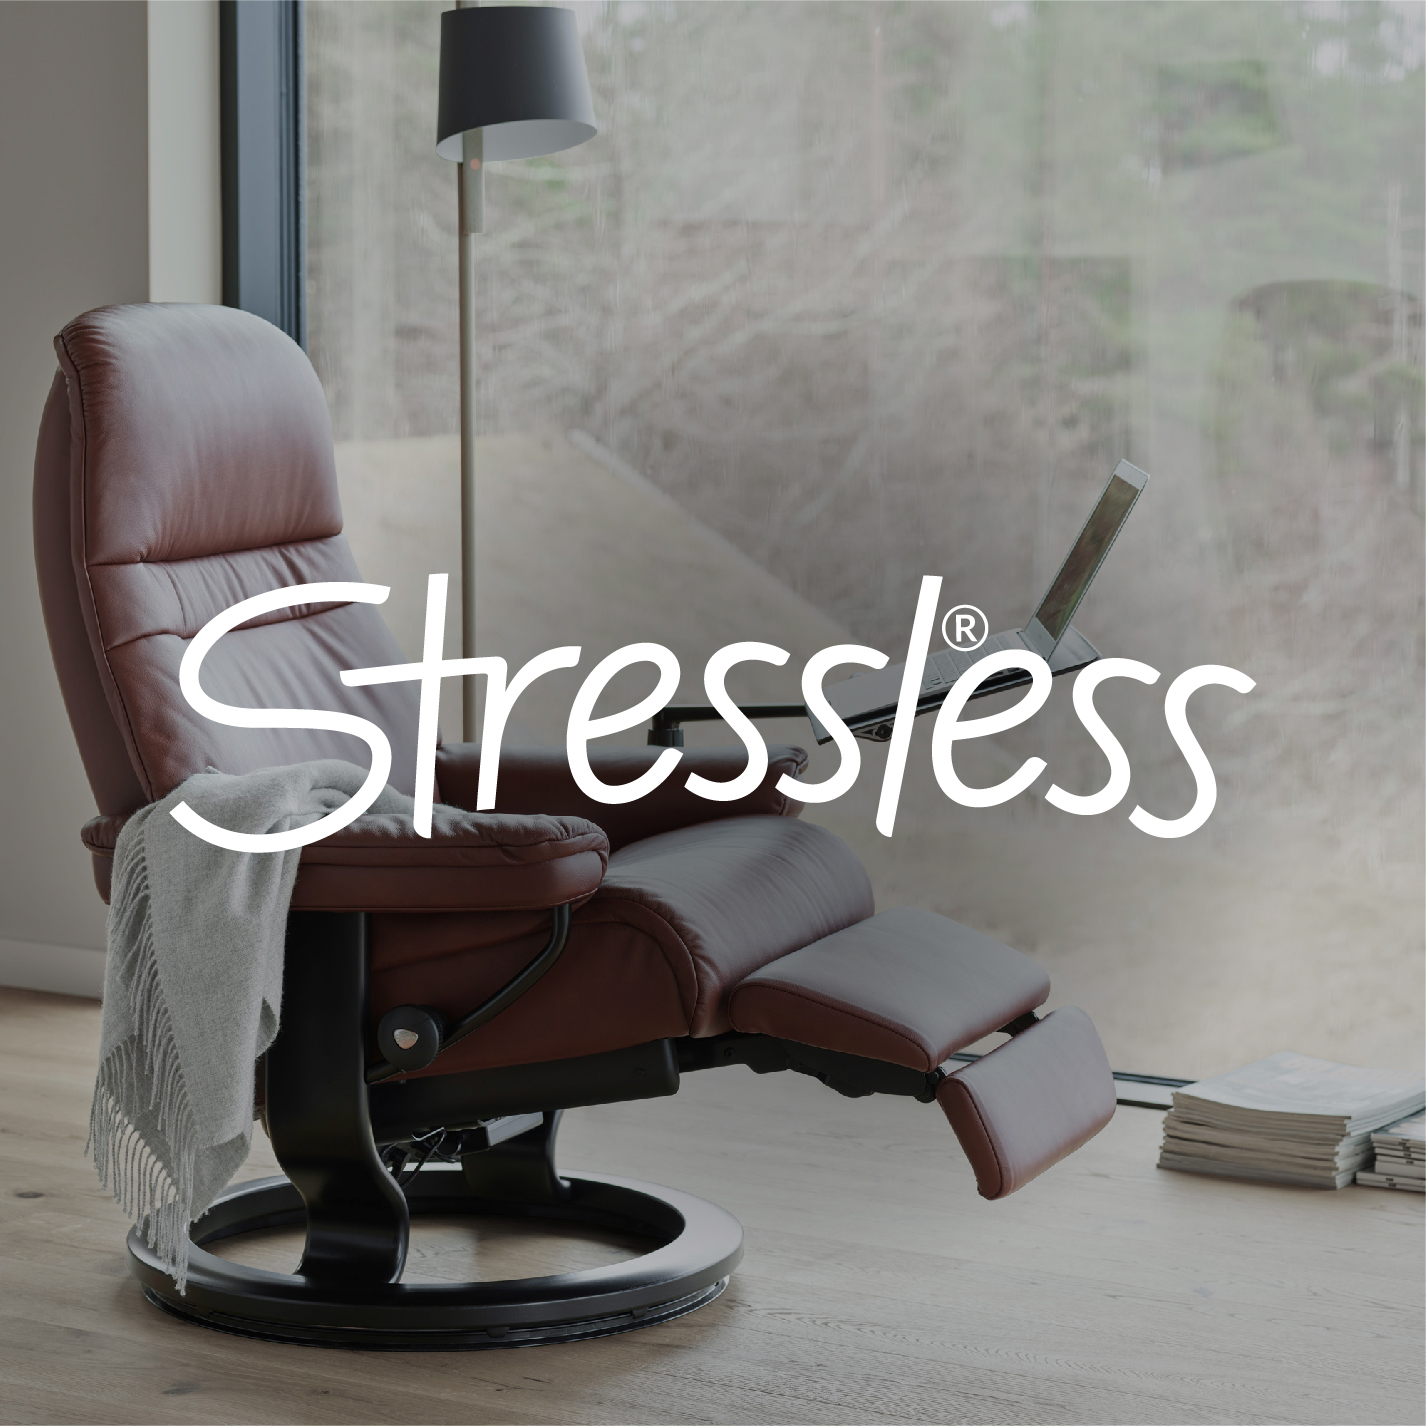 STRESSLESS LOGO WITH IMAGE